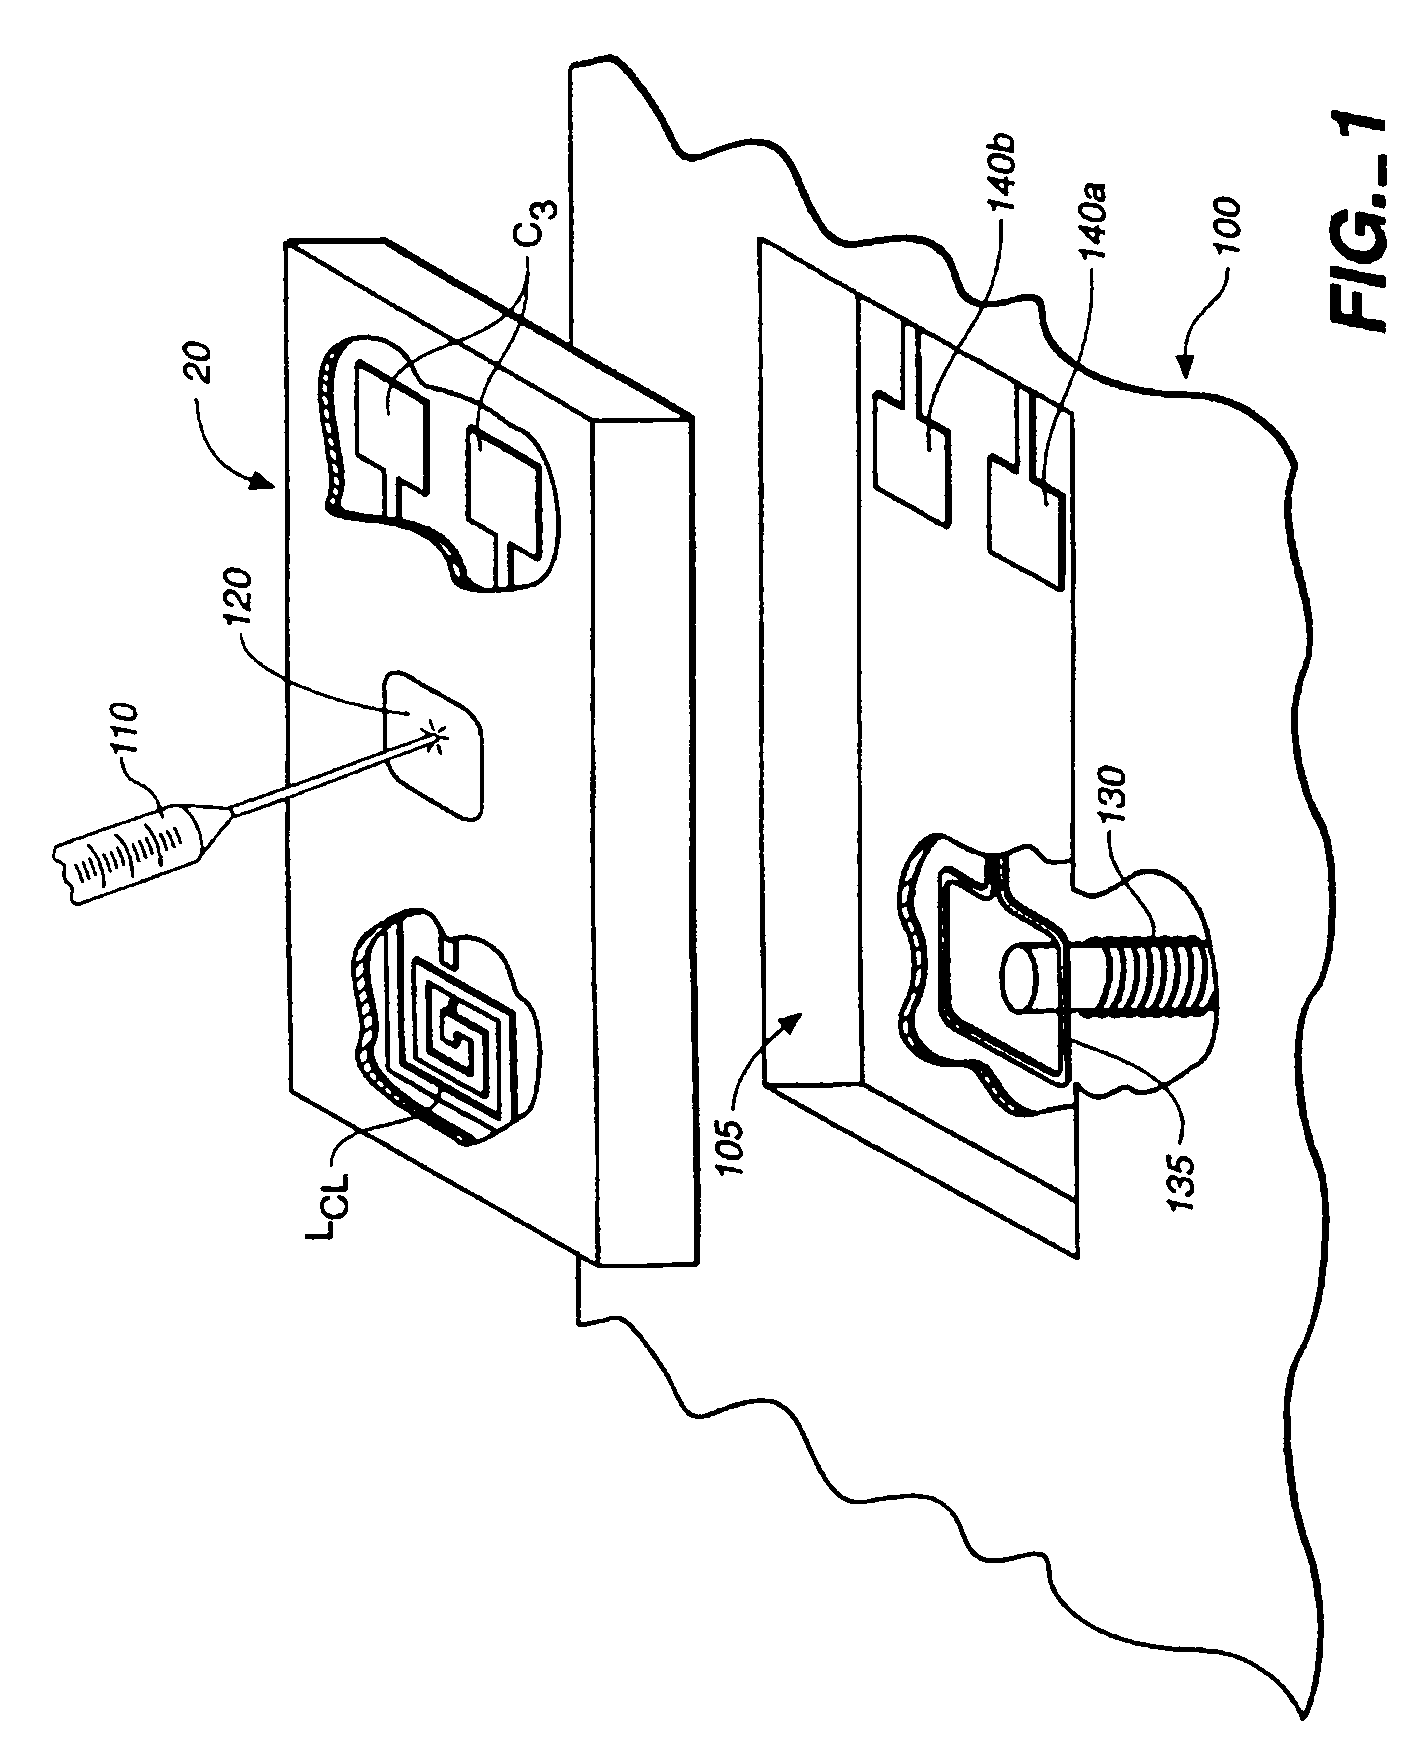 Microfabricated reactor, process for manufacturing the reactor, and method of amplification